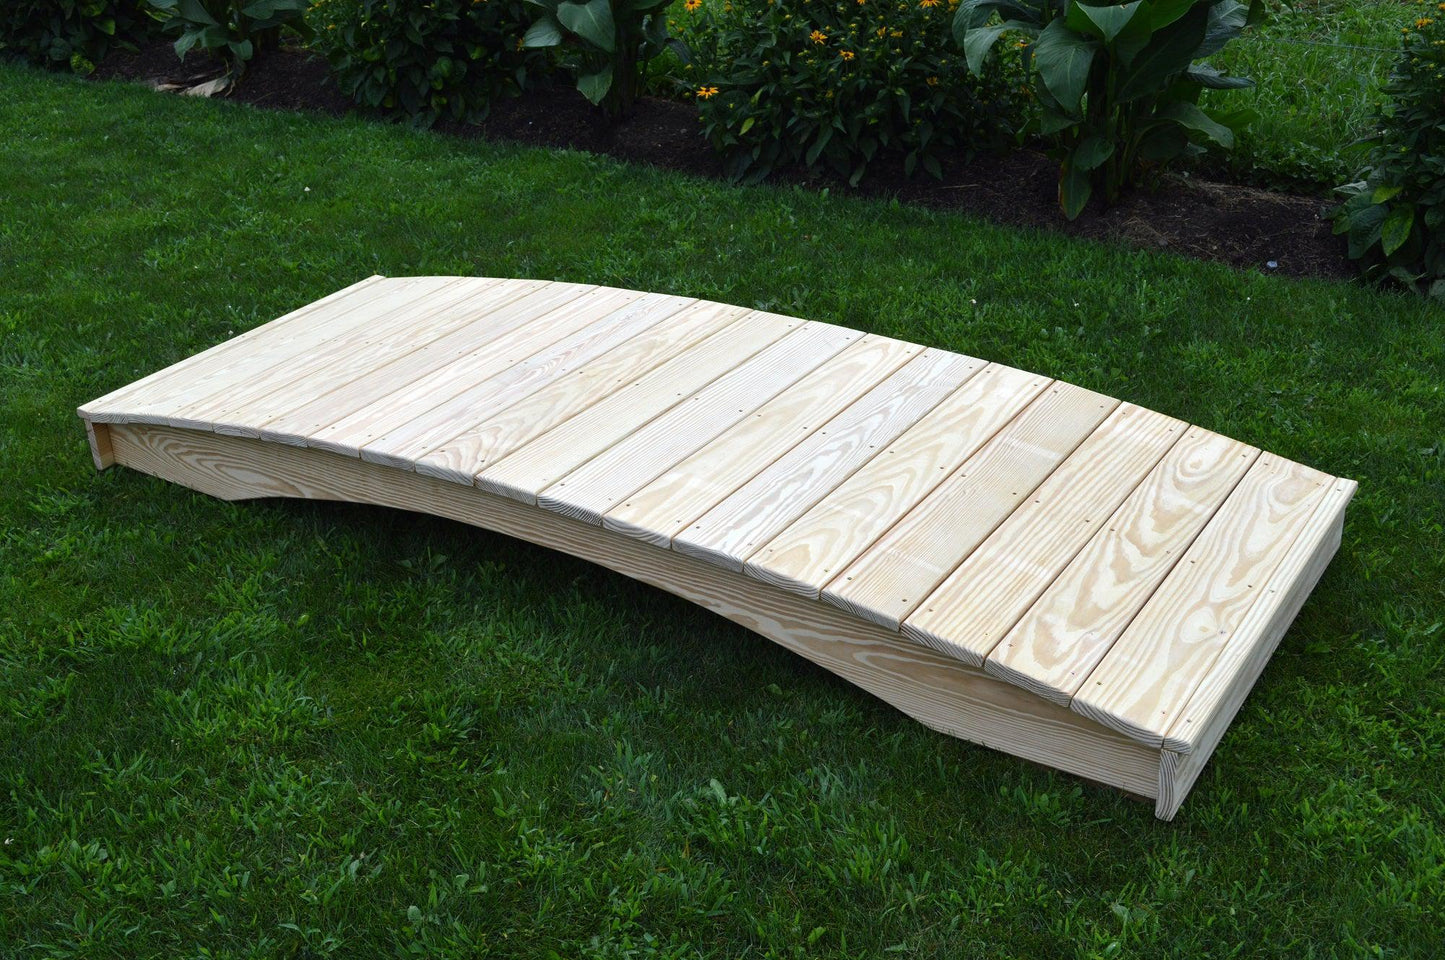 A&L Furniture Co. Western Red Cedar 3' x 10' Plank Garden Bridge - LEAD TIME TO SHIP 4 WEEKS OR LESS